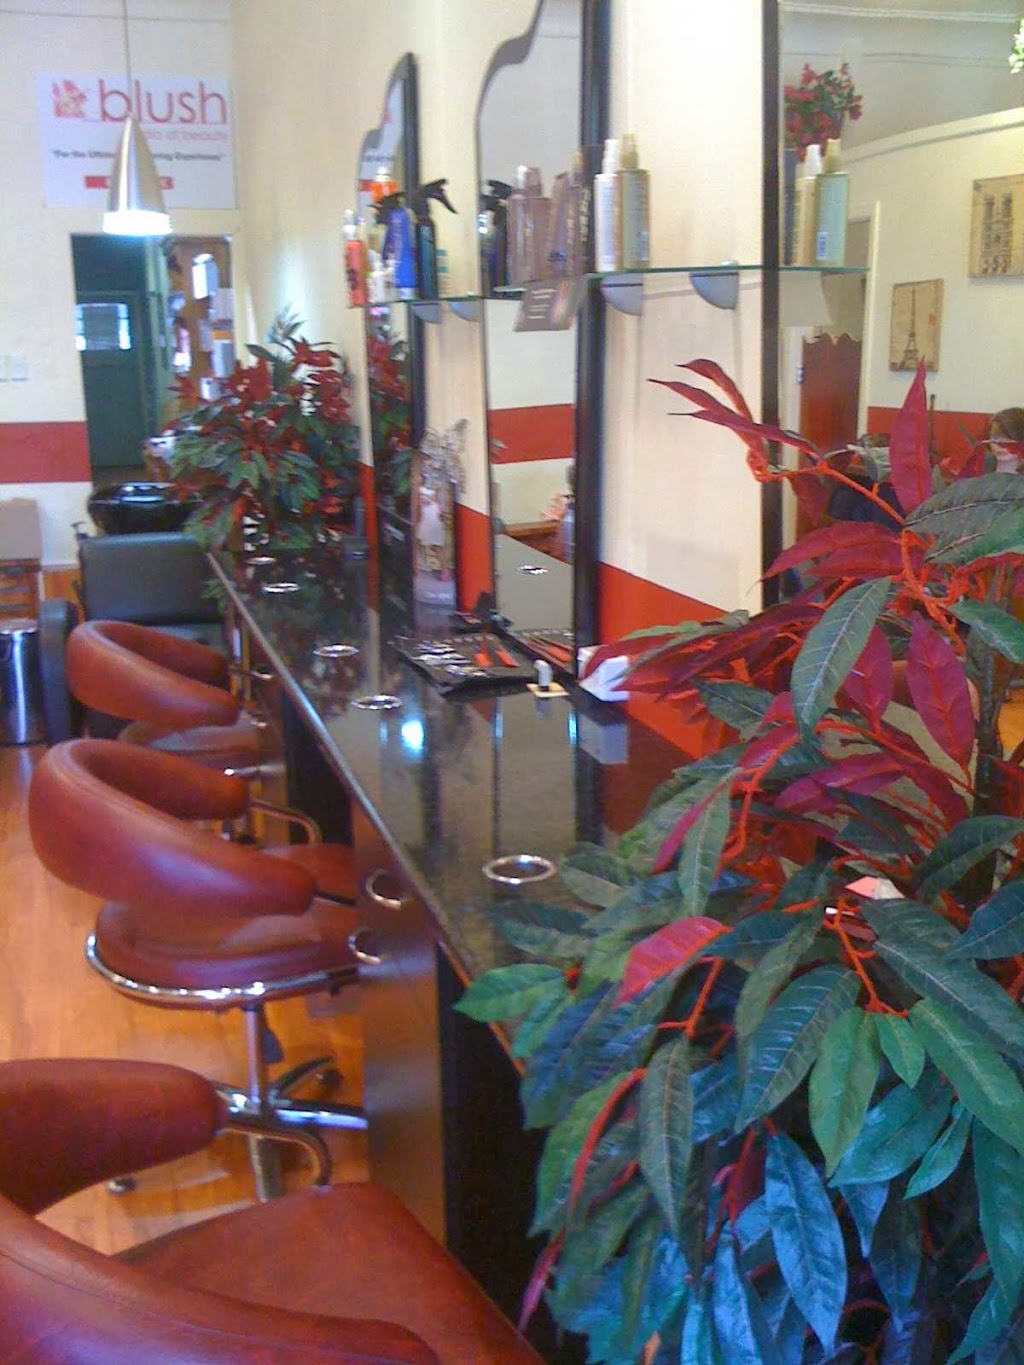 Excellence in Hair | hair care | 165-167 Argyle St, Picton NSW 2571, Australia | 0246771274 OR +61 2 4677 1274